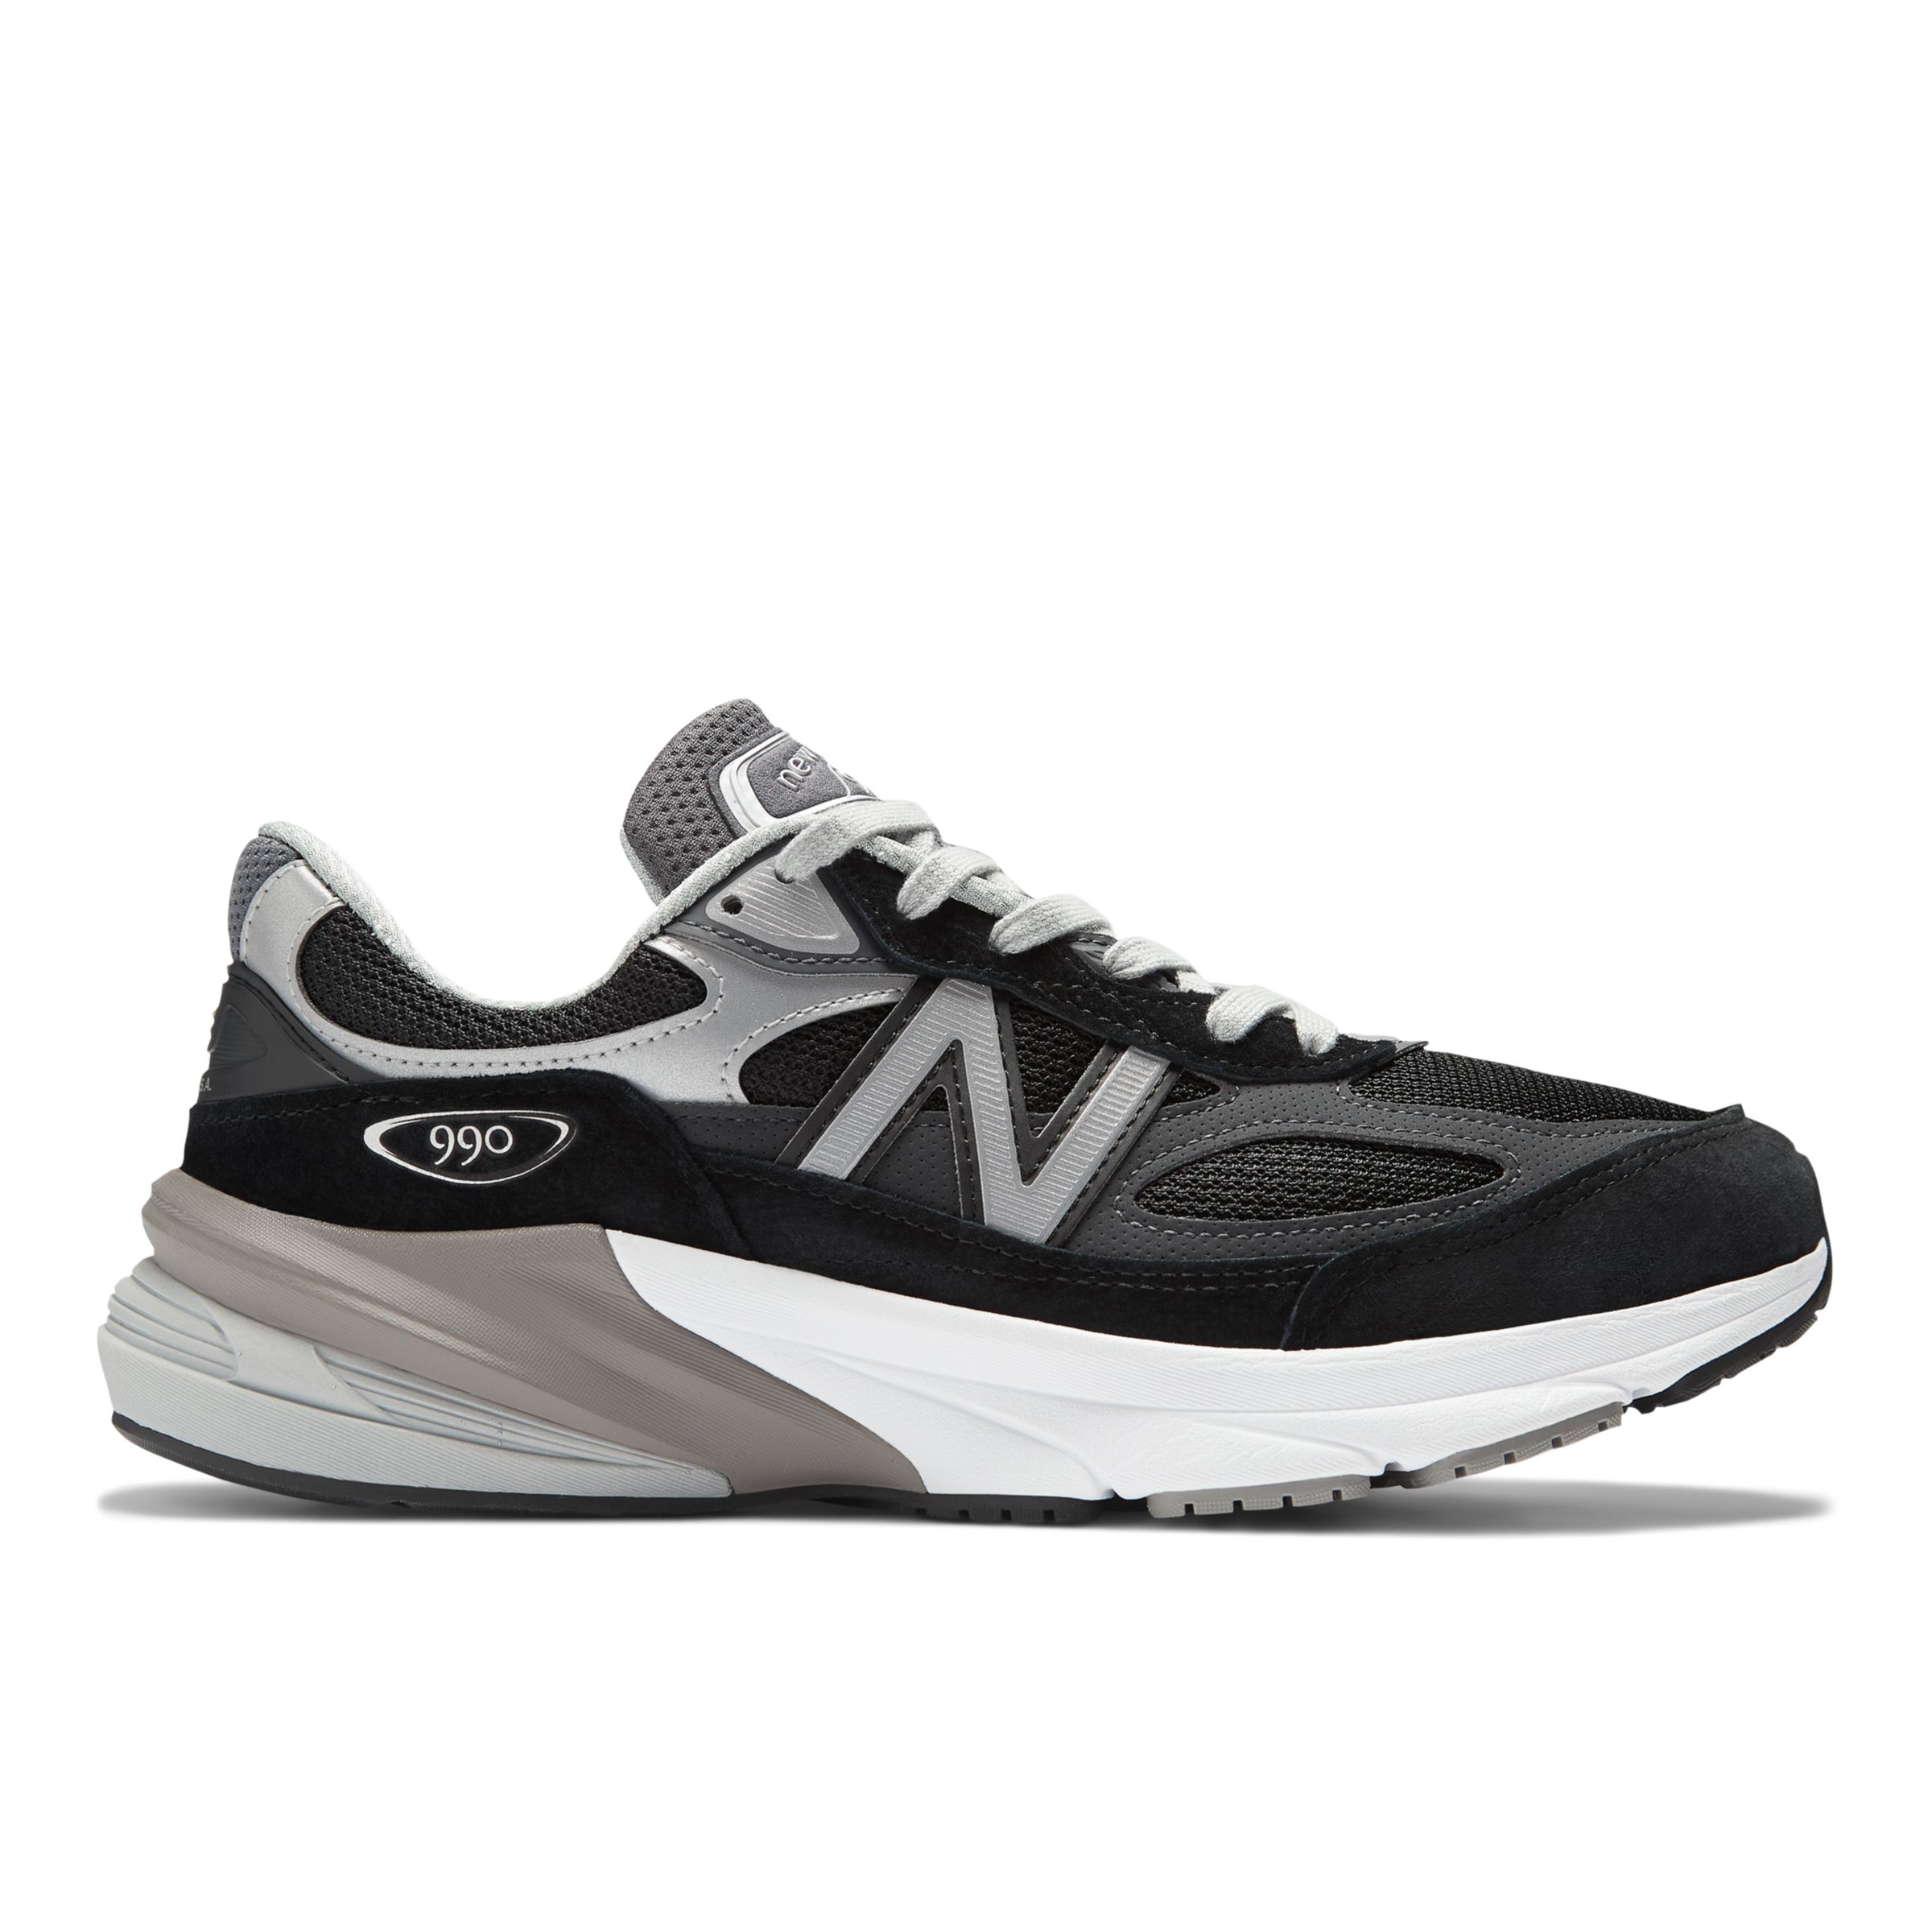 Made in USA 990v6 - Women's 990 - Team, - NB Team Sports - US